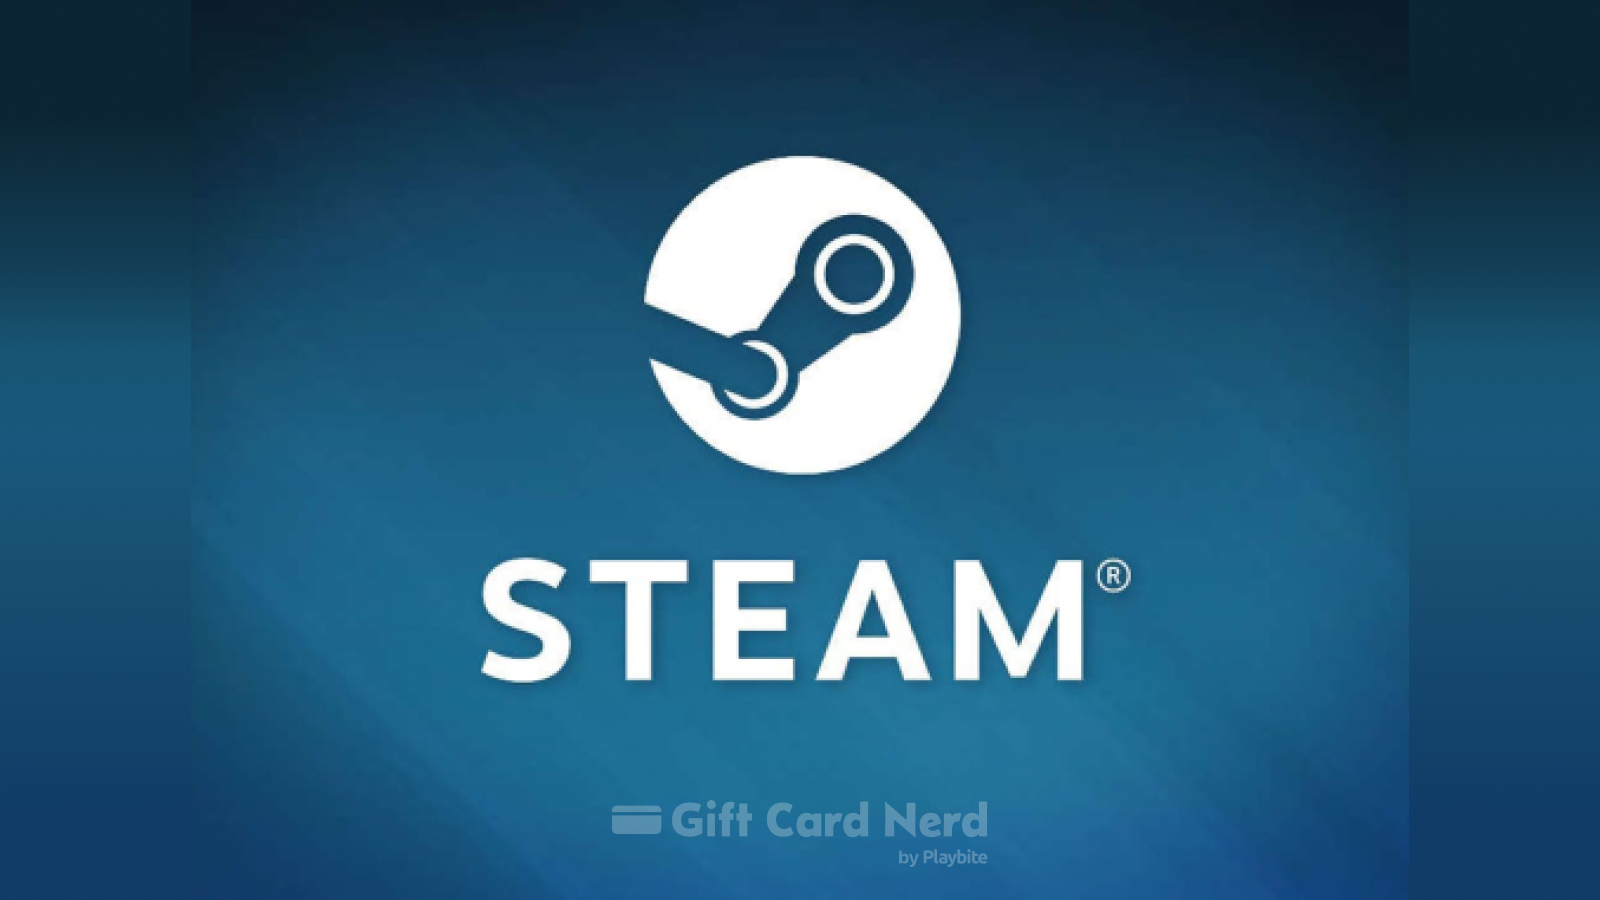 Can I Use a Steam Gift Card on DoorDash?